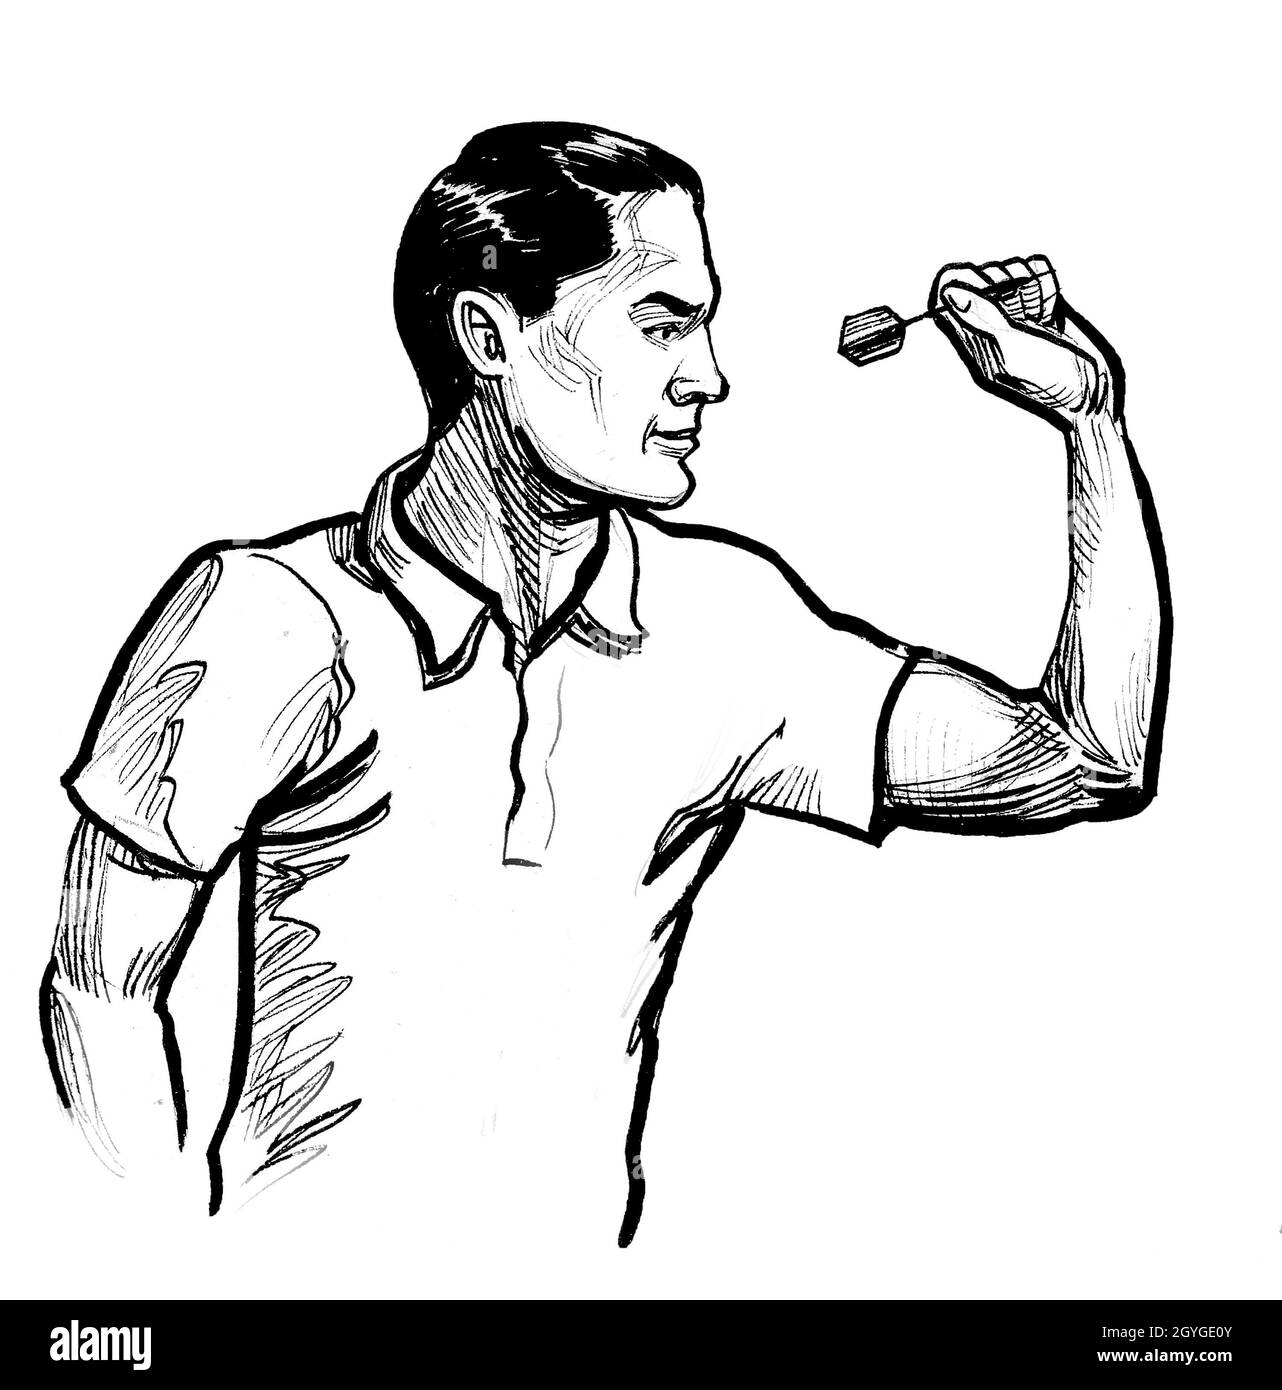 Man throwing dart arrow. ink black and white drawing Stock Photo